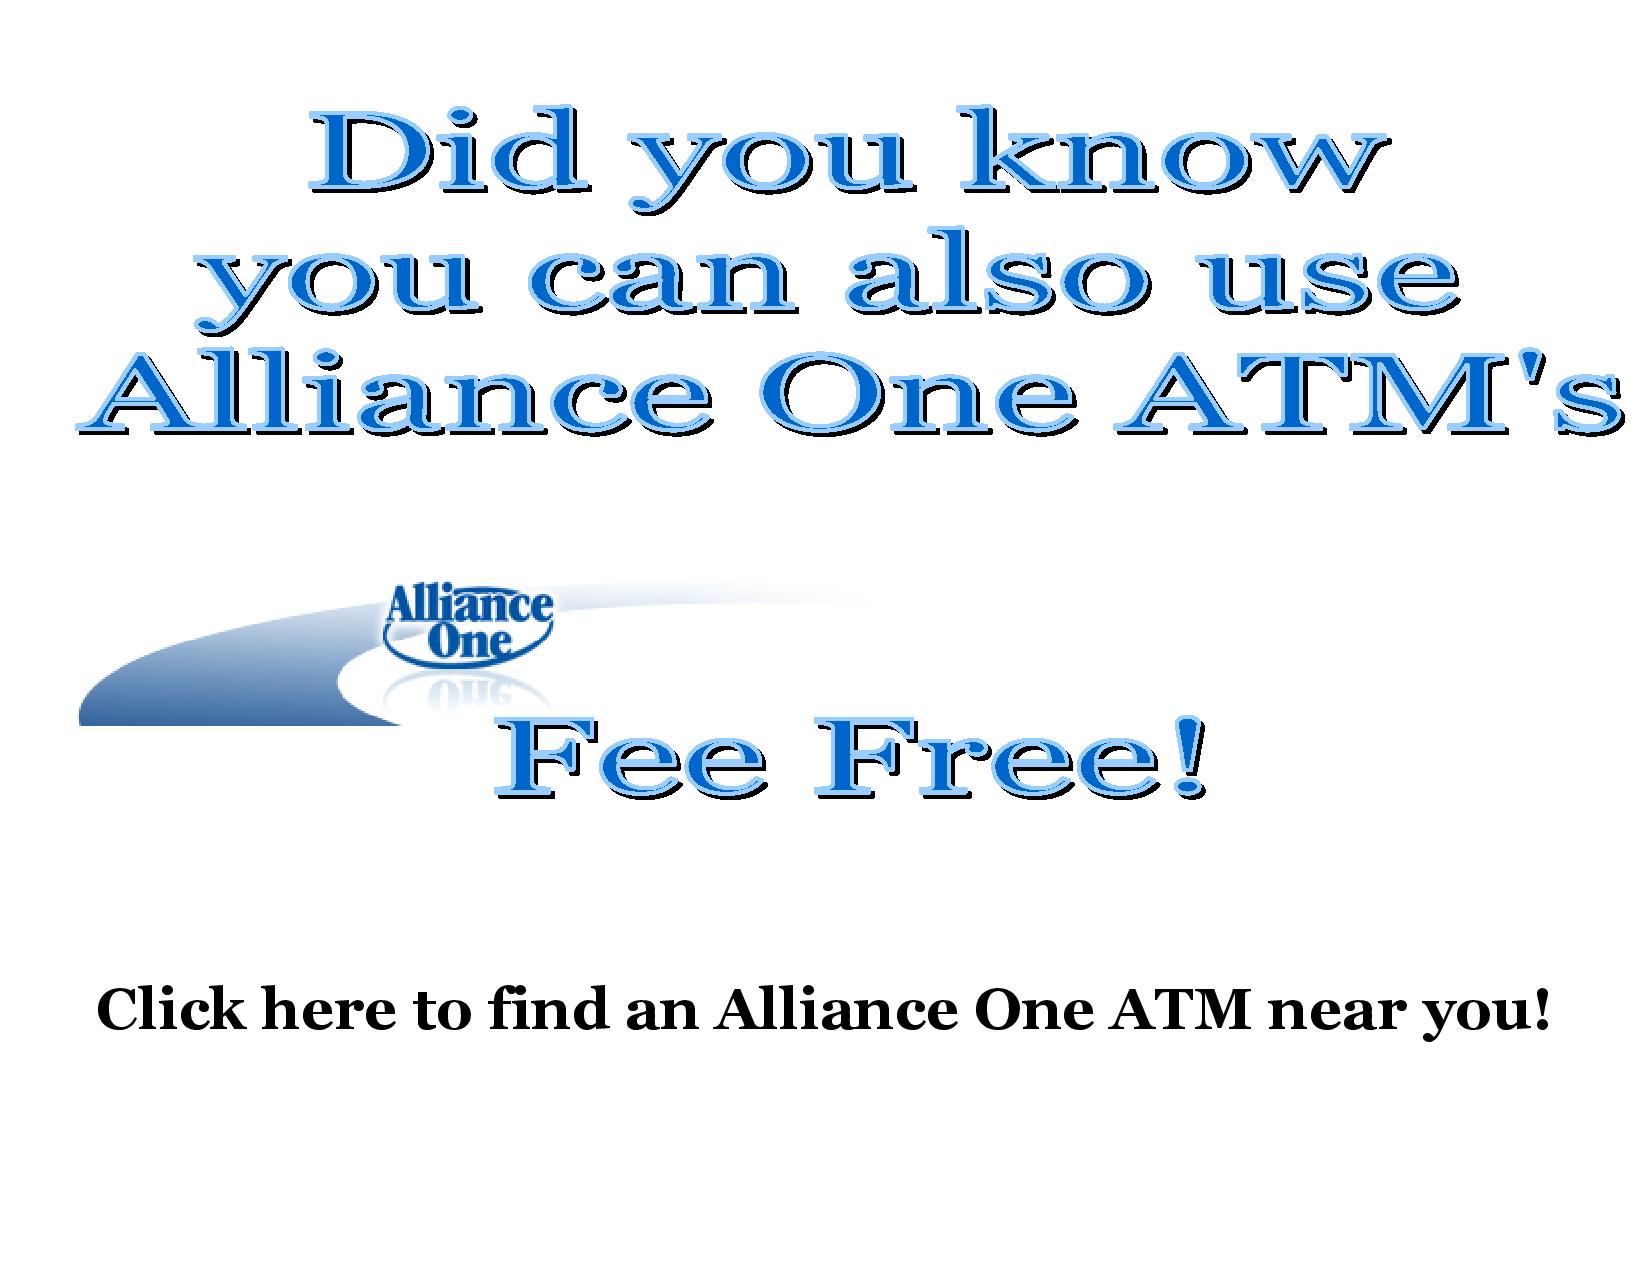 Alliance One ATM